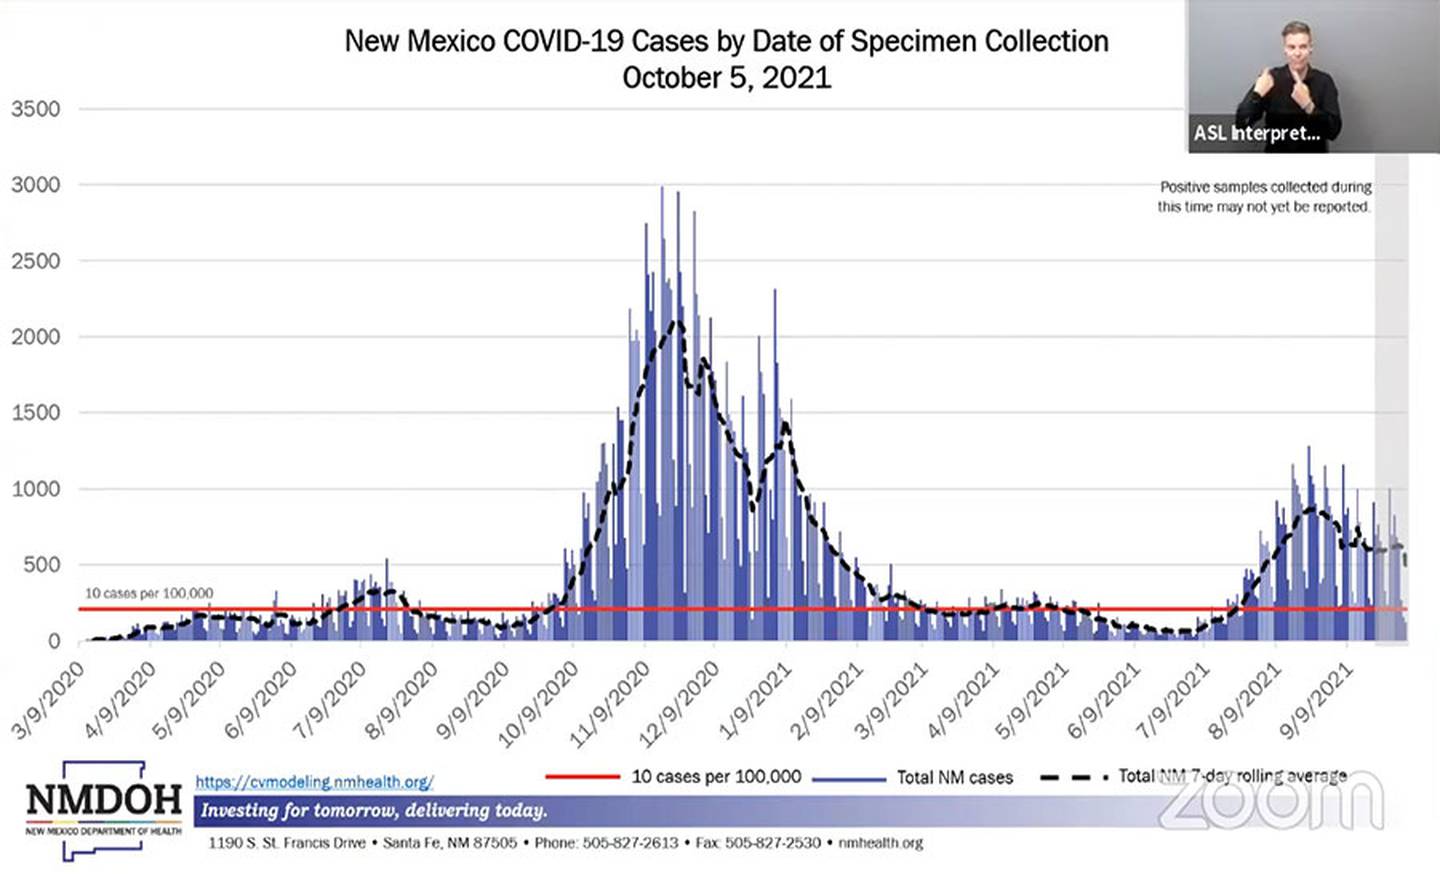 "New Mexico COVID-19 cases by date of specimen collection. Oct. 5, 2021" NMDOH, 10.6.21